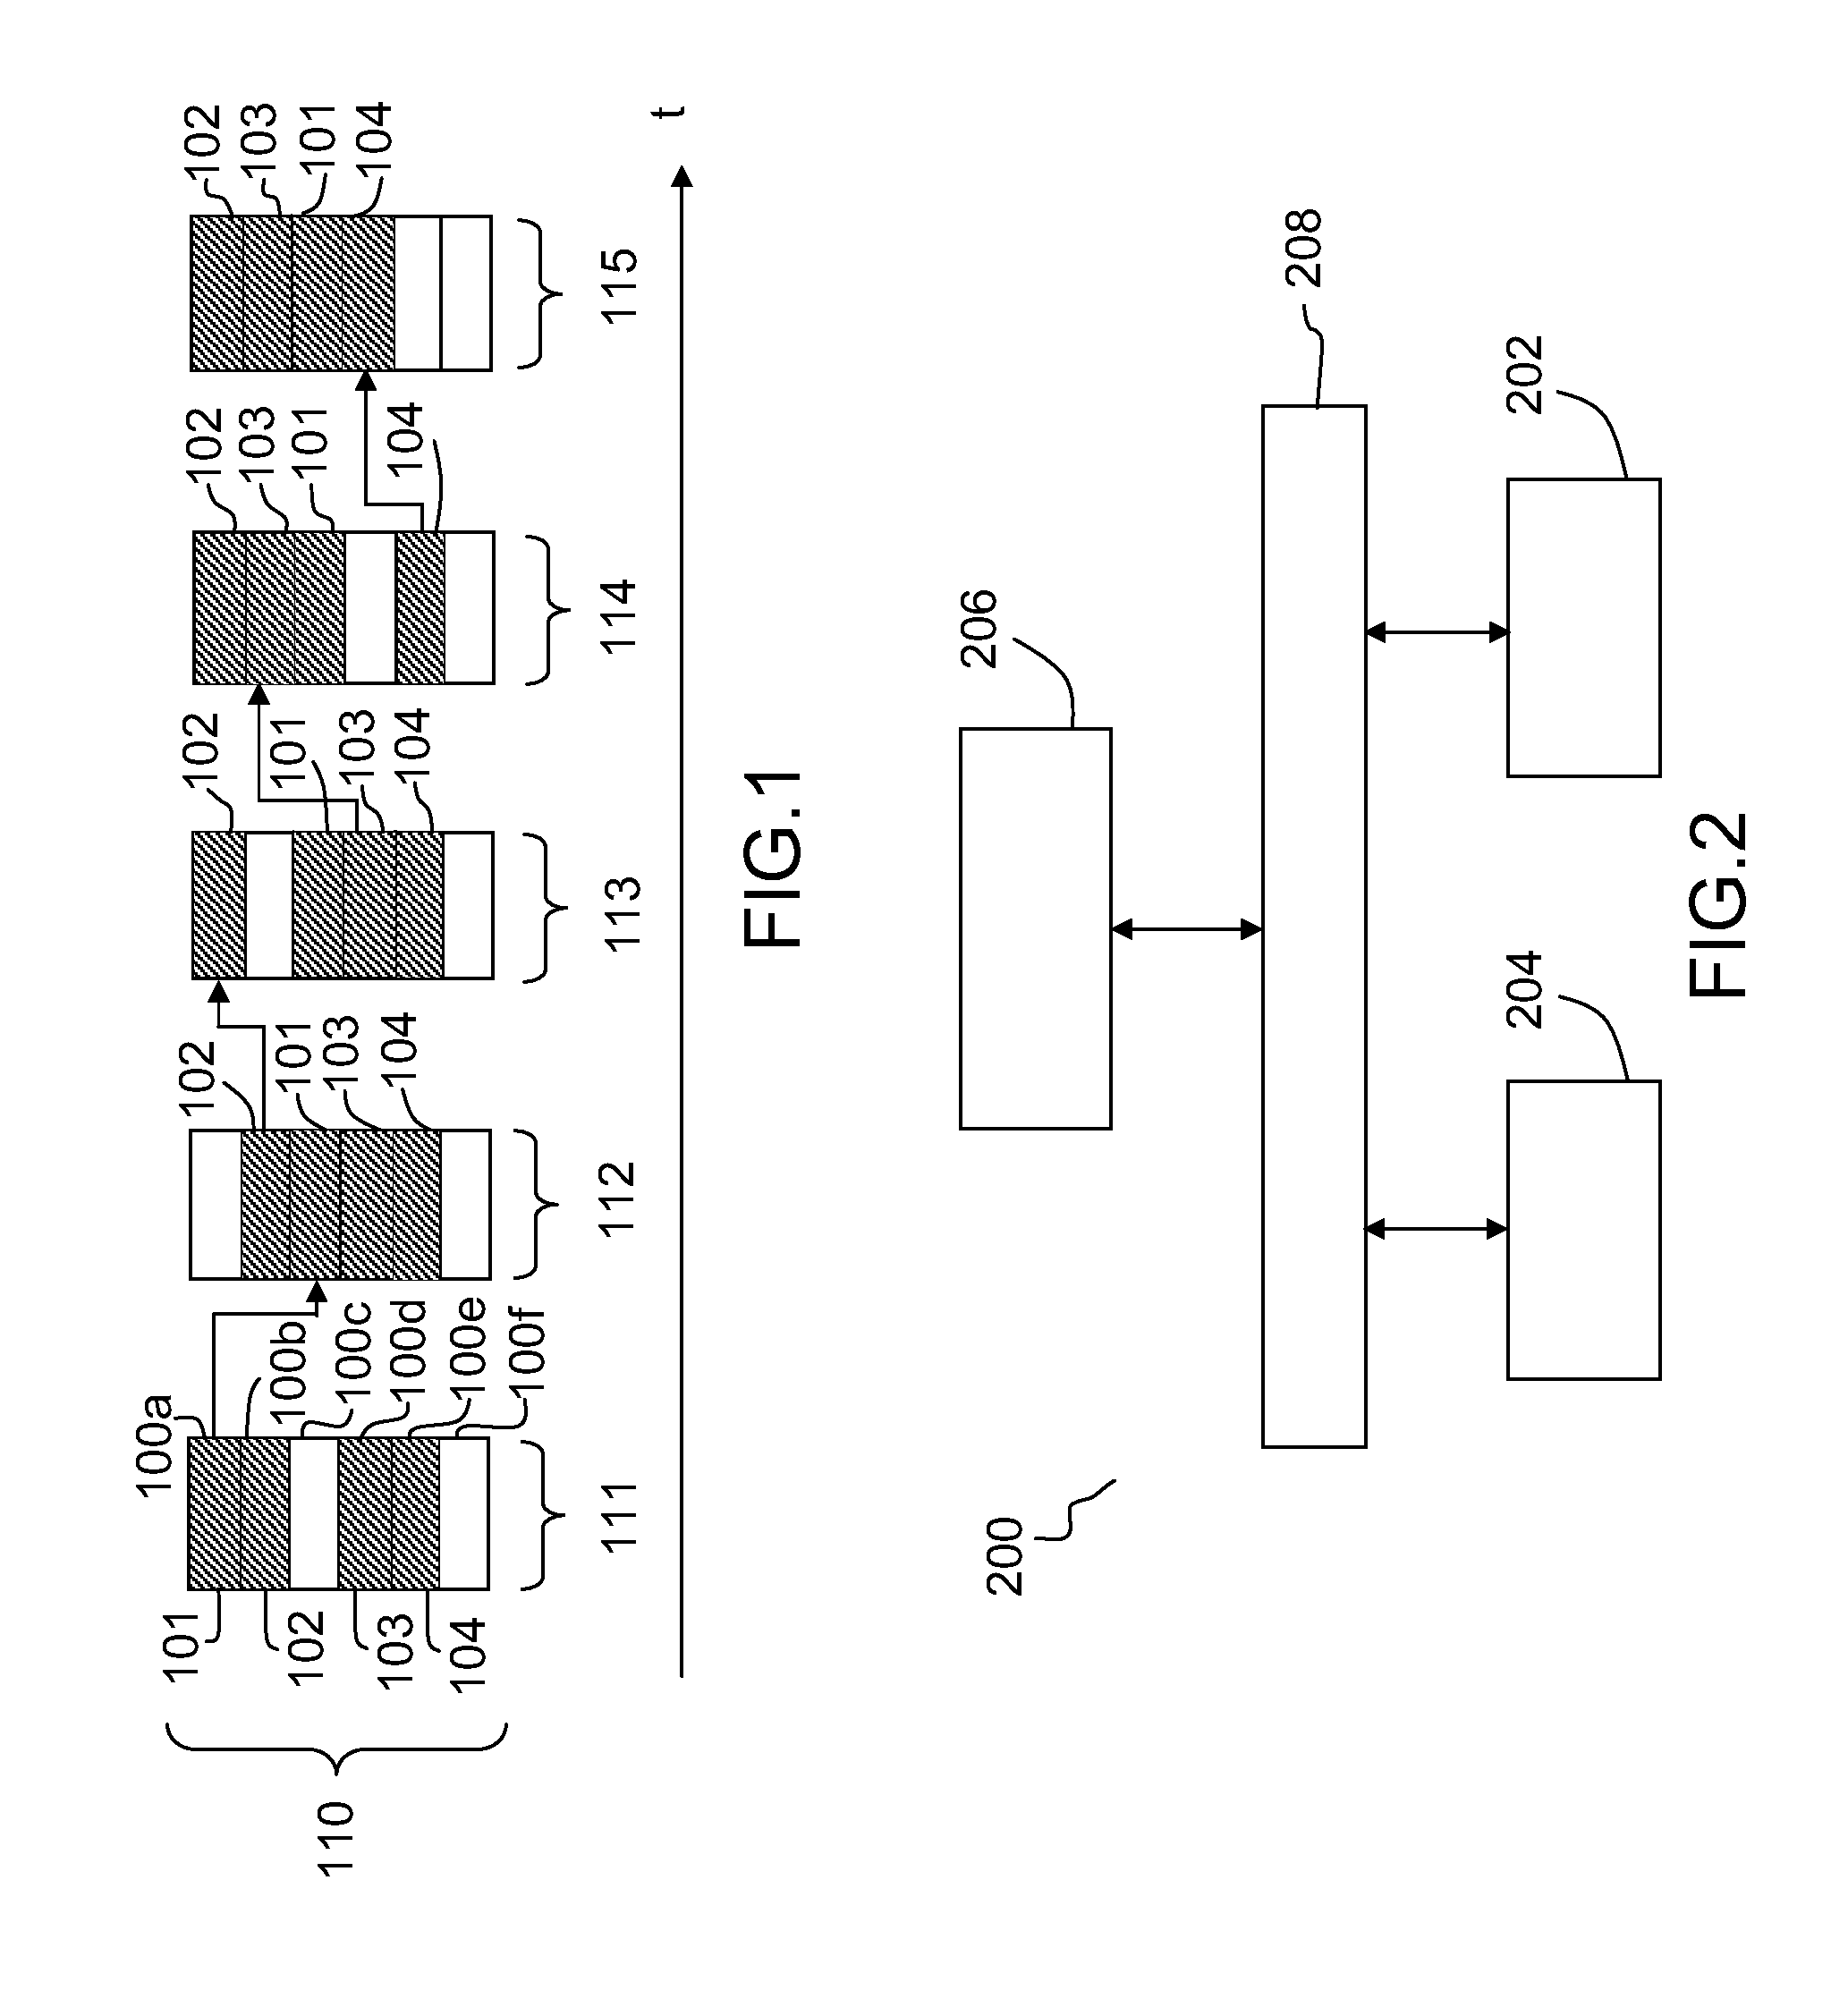 Method and Device for Reducing the Remanence of Data Stored on a Recording Medium